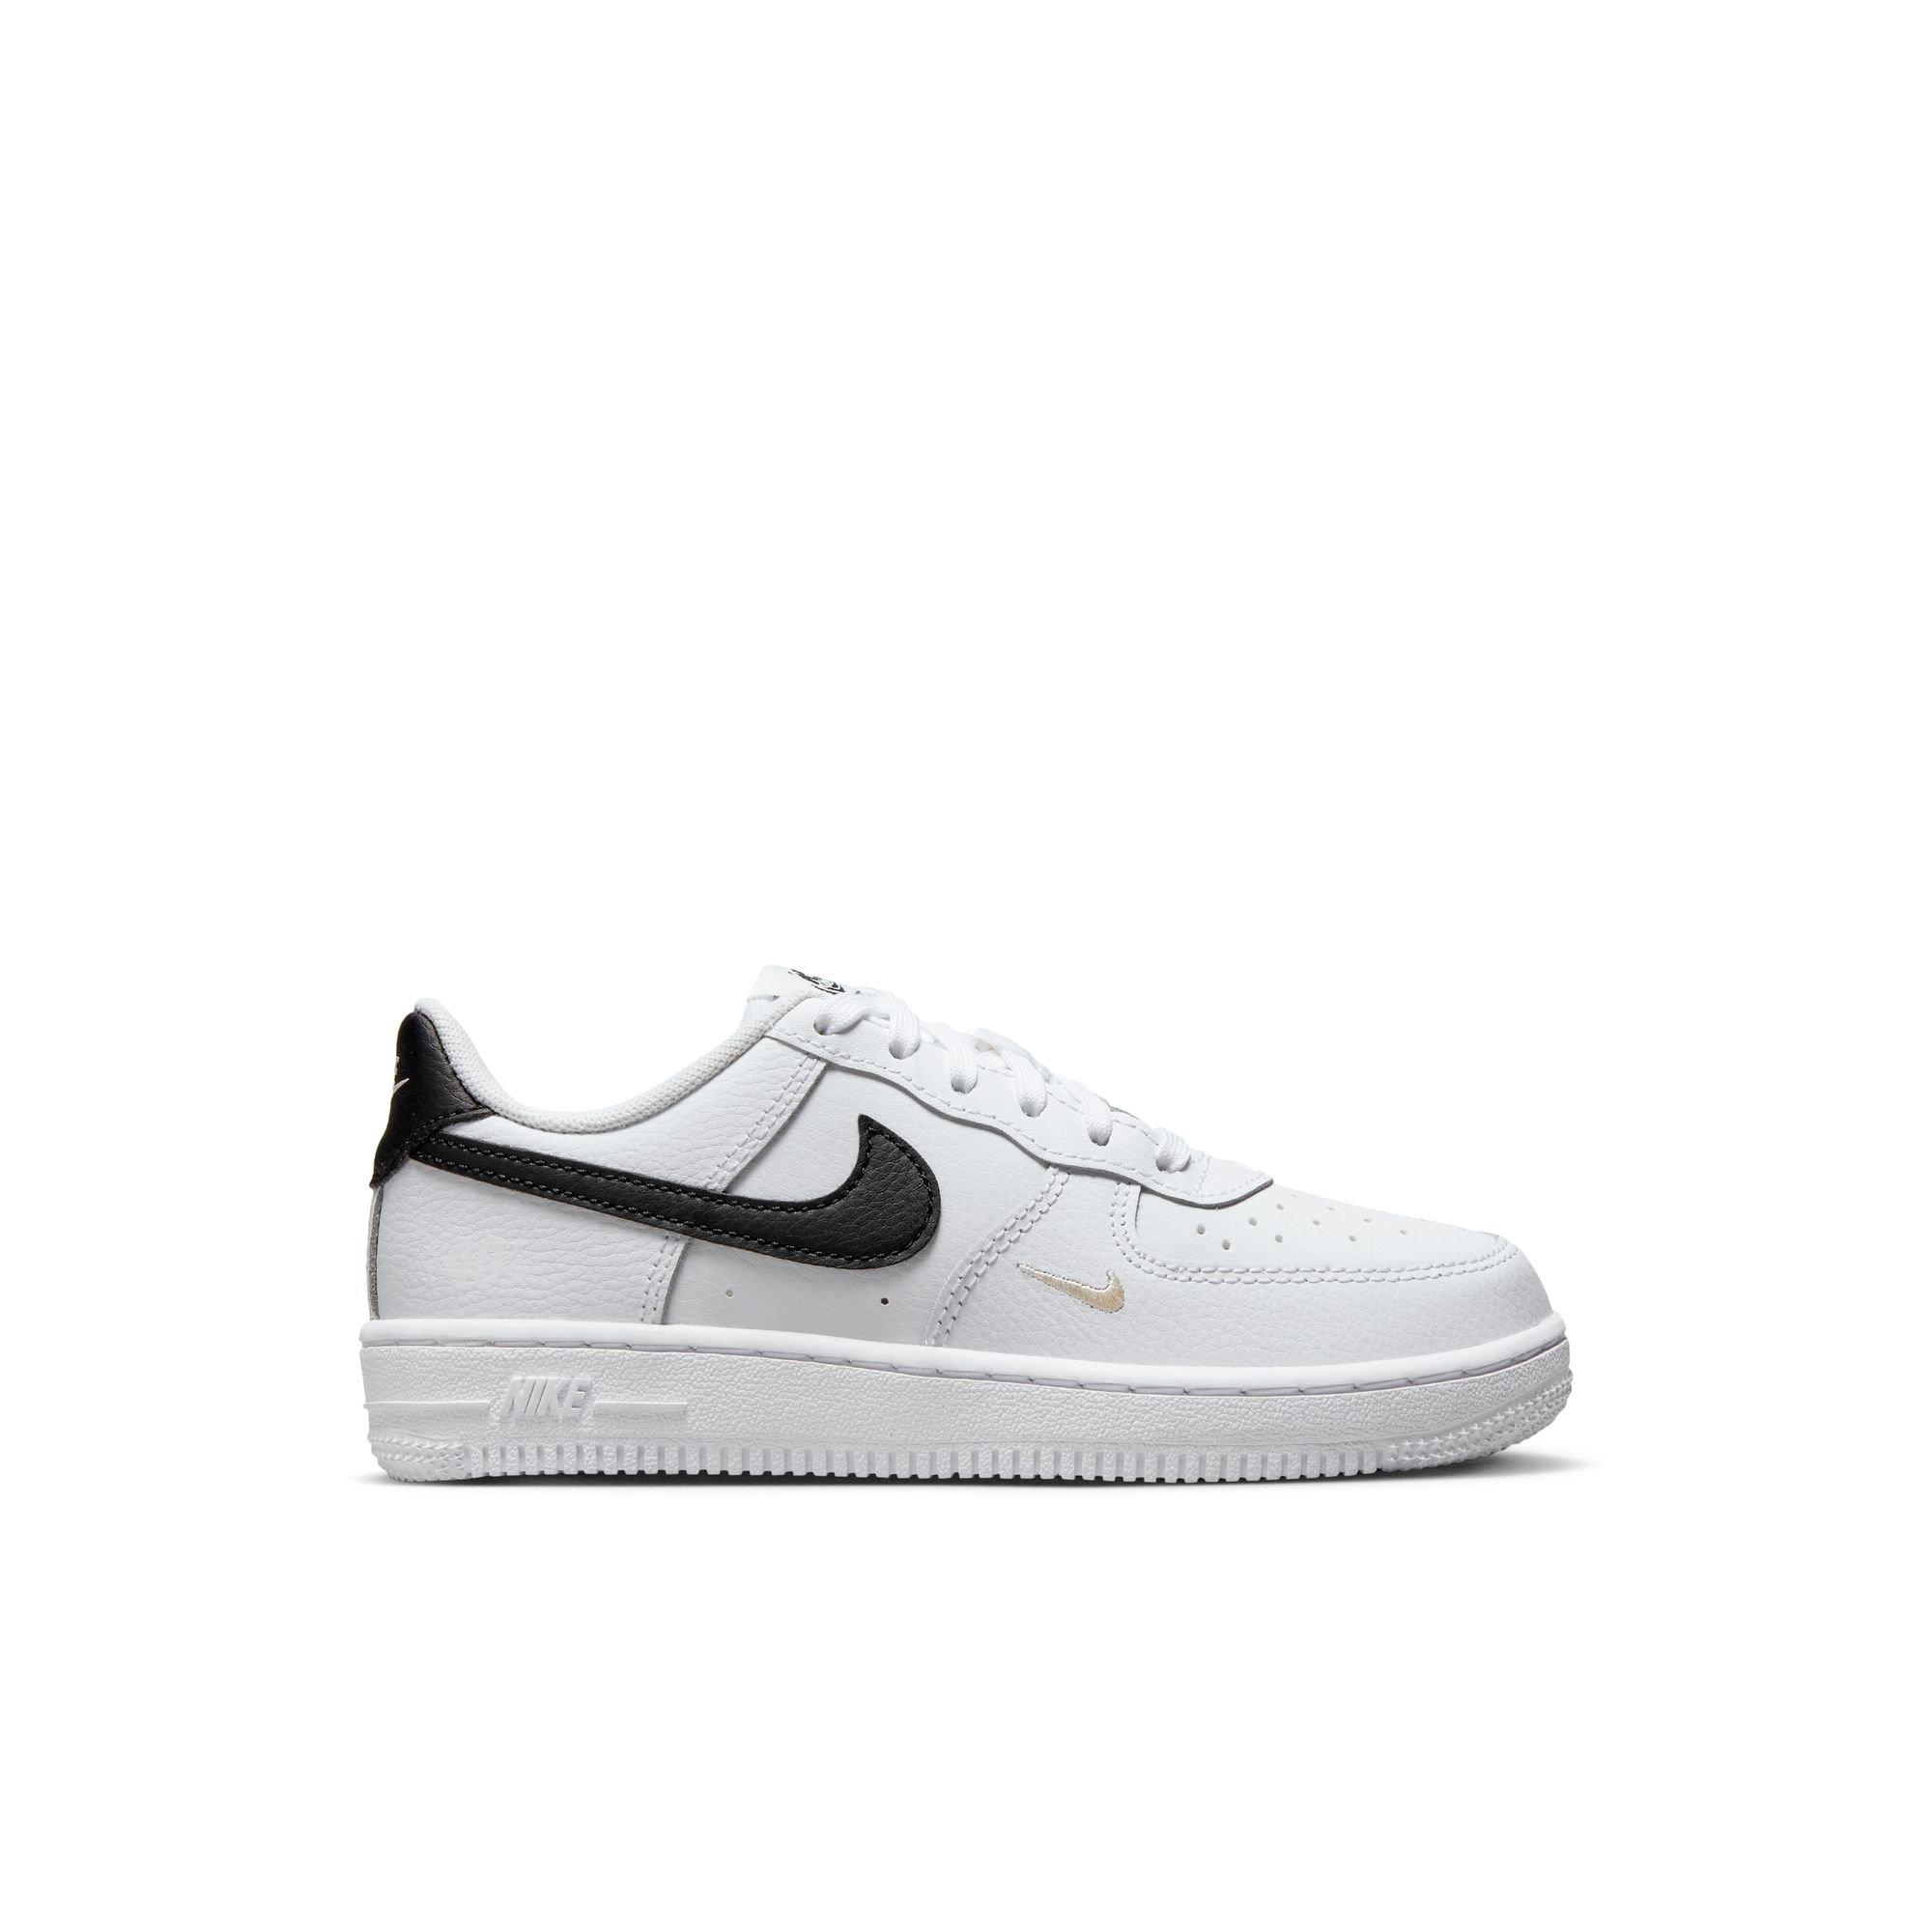 white air force ones pick up in store